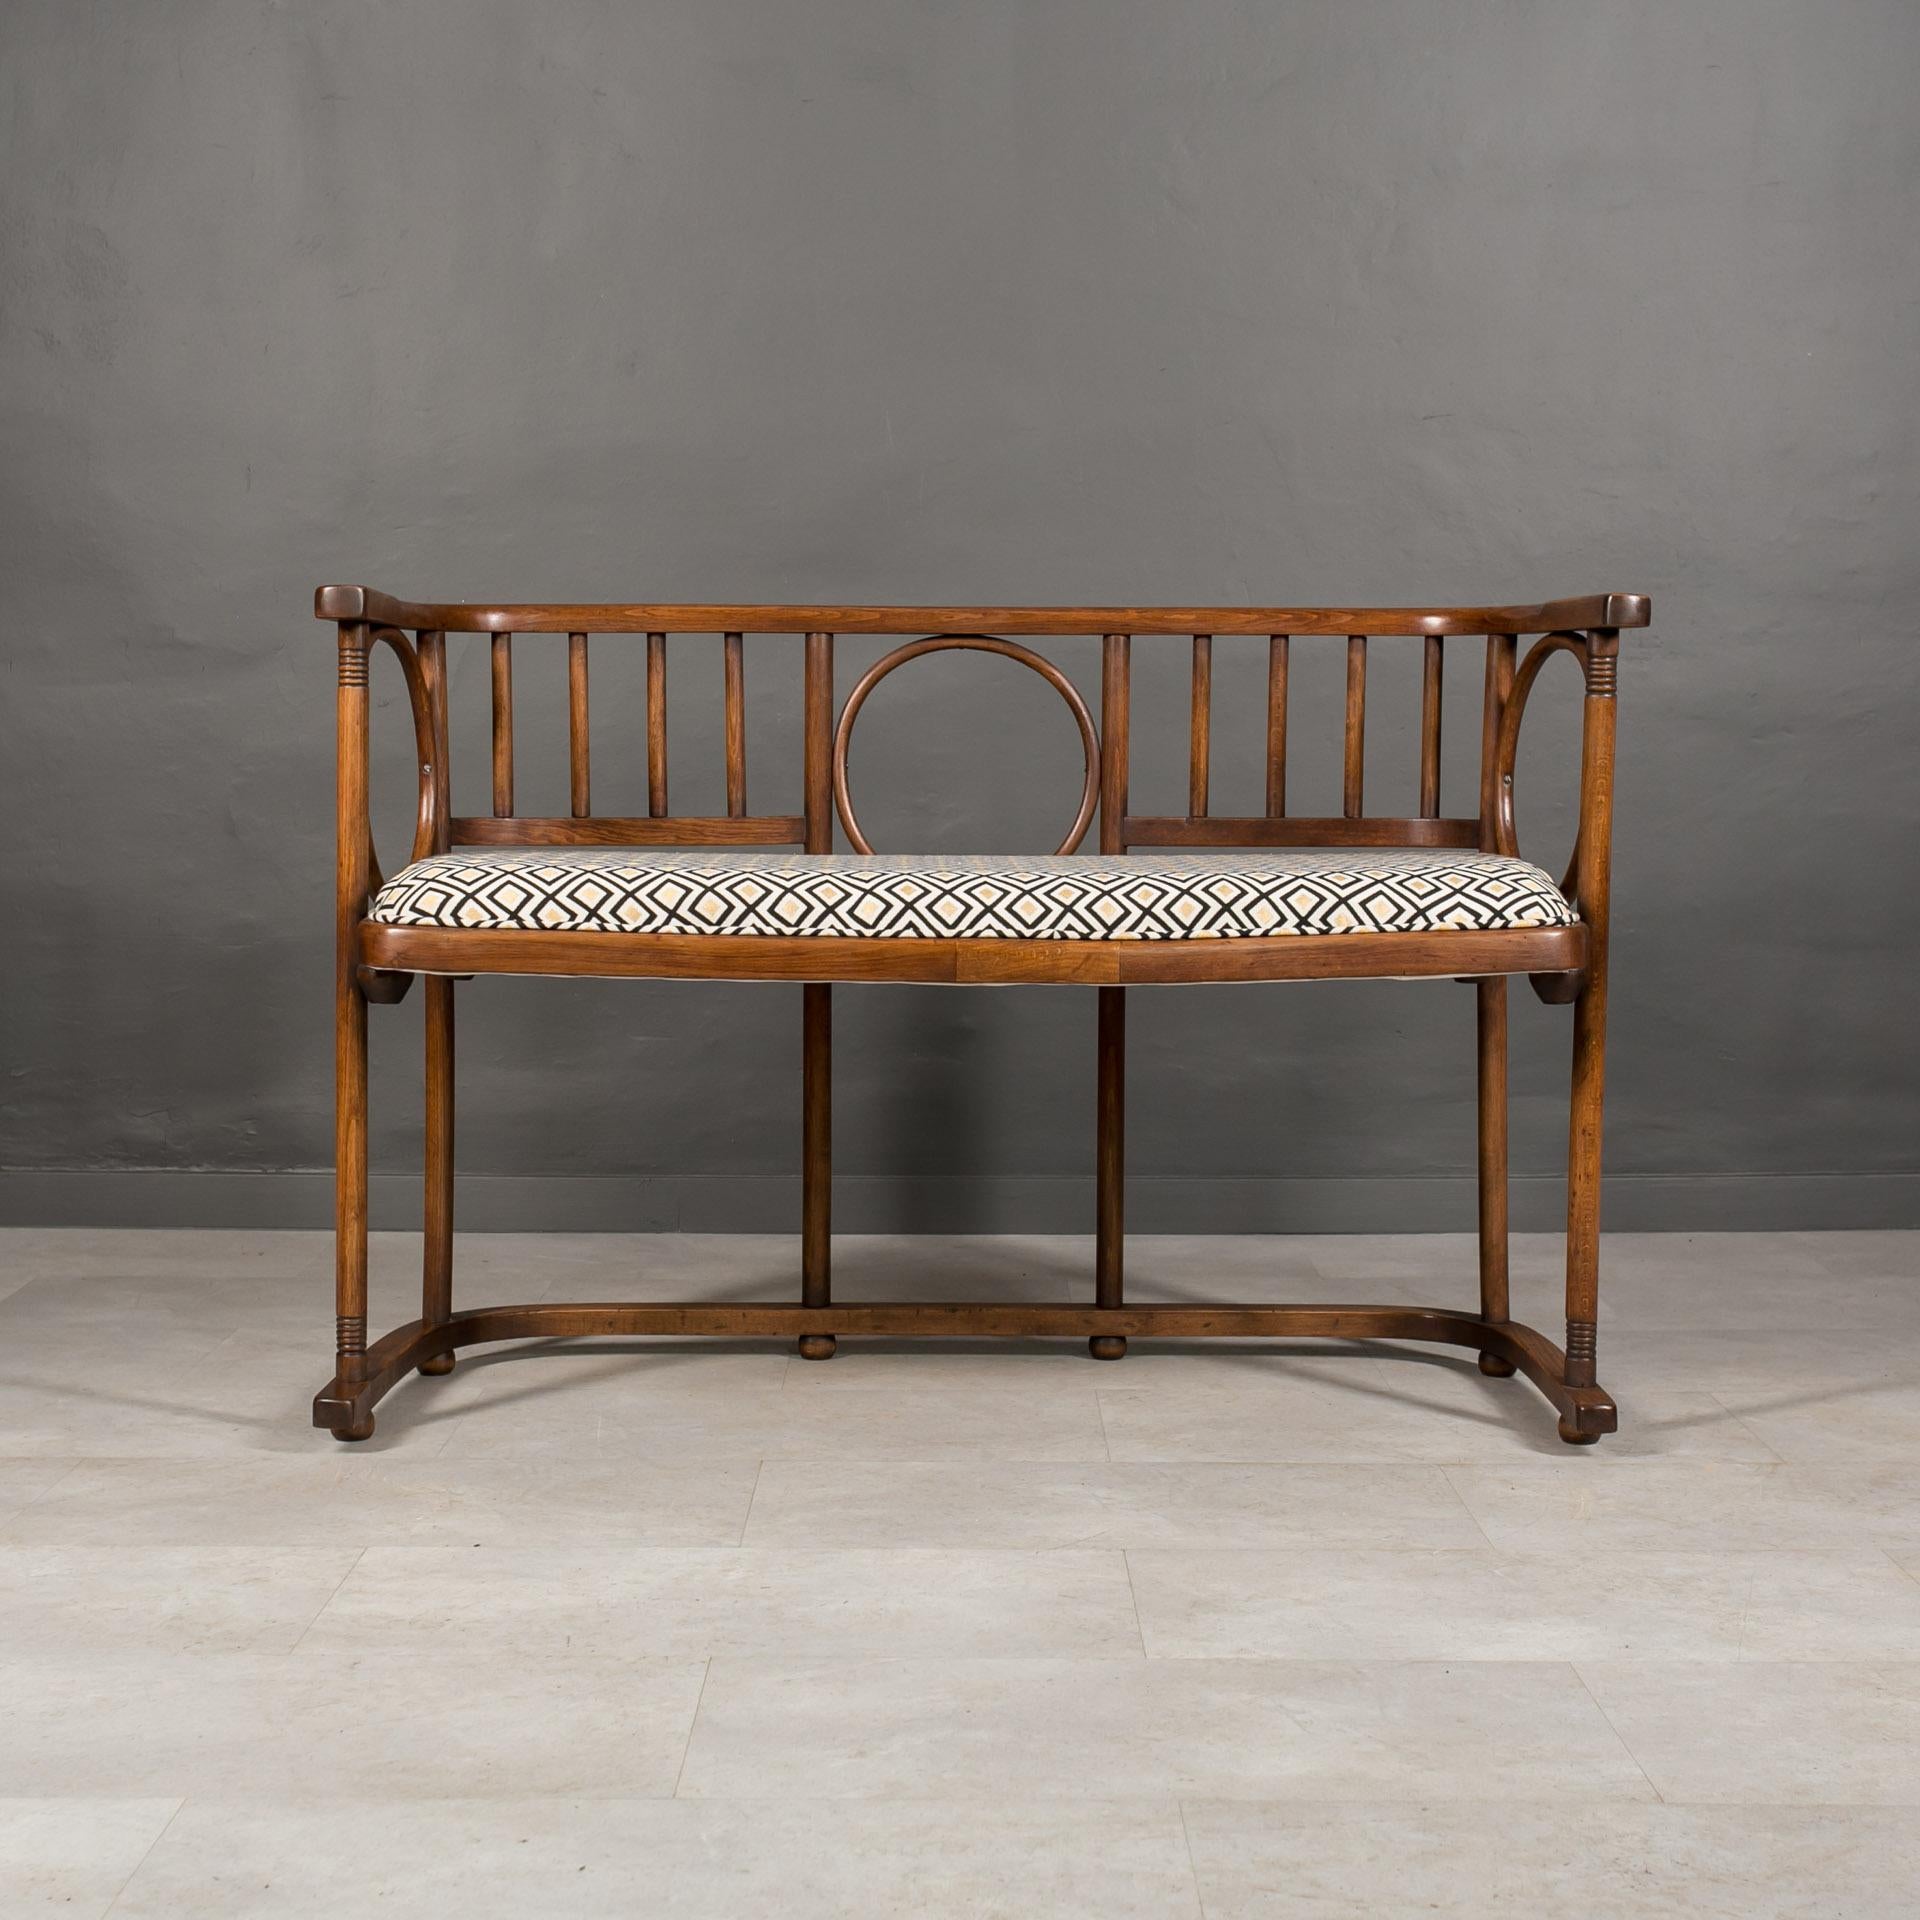 Vienna Secession Early 20th Century Bentwood Bench Settee by J. Hoffmann for Thonet - Mundus For Sale